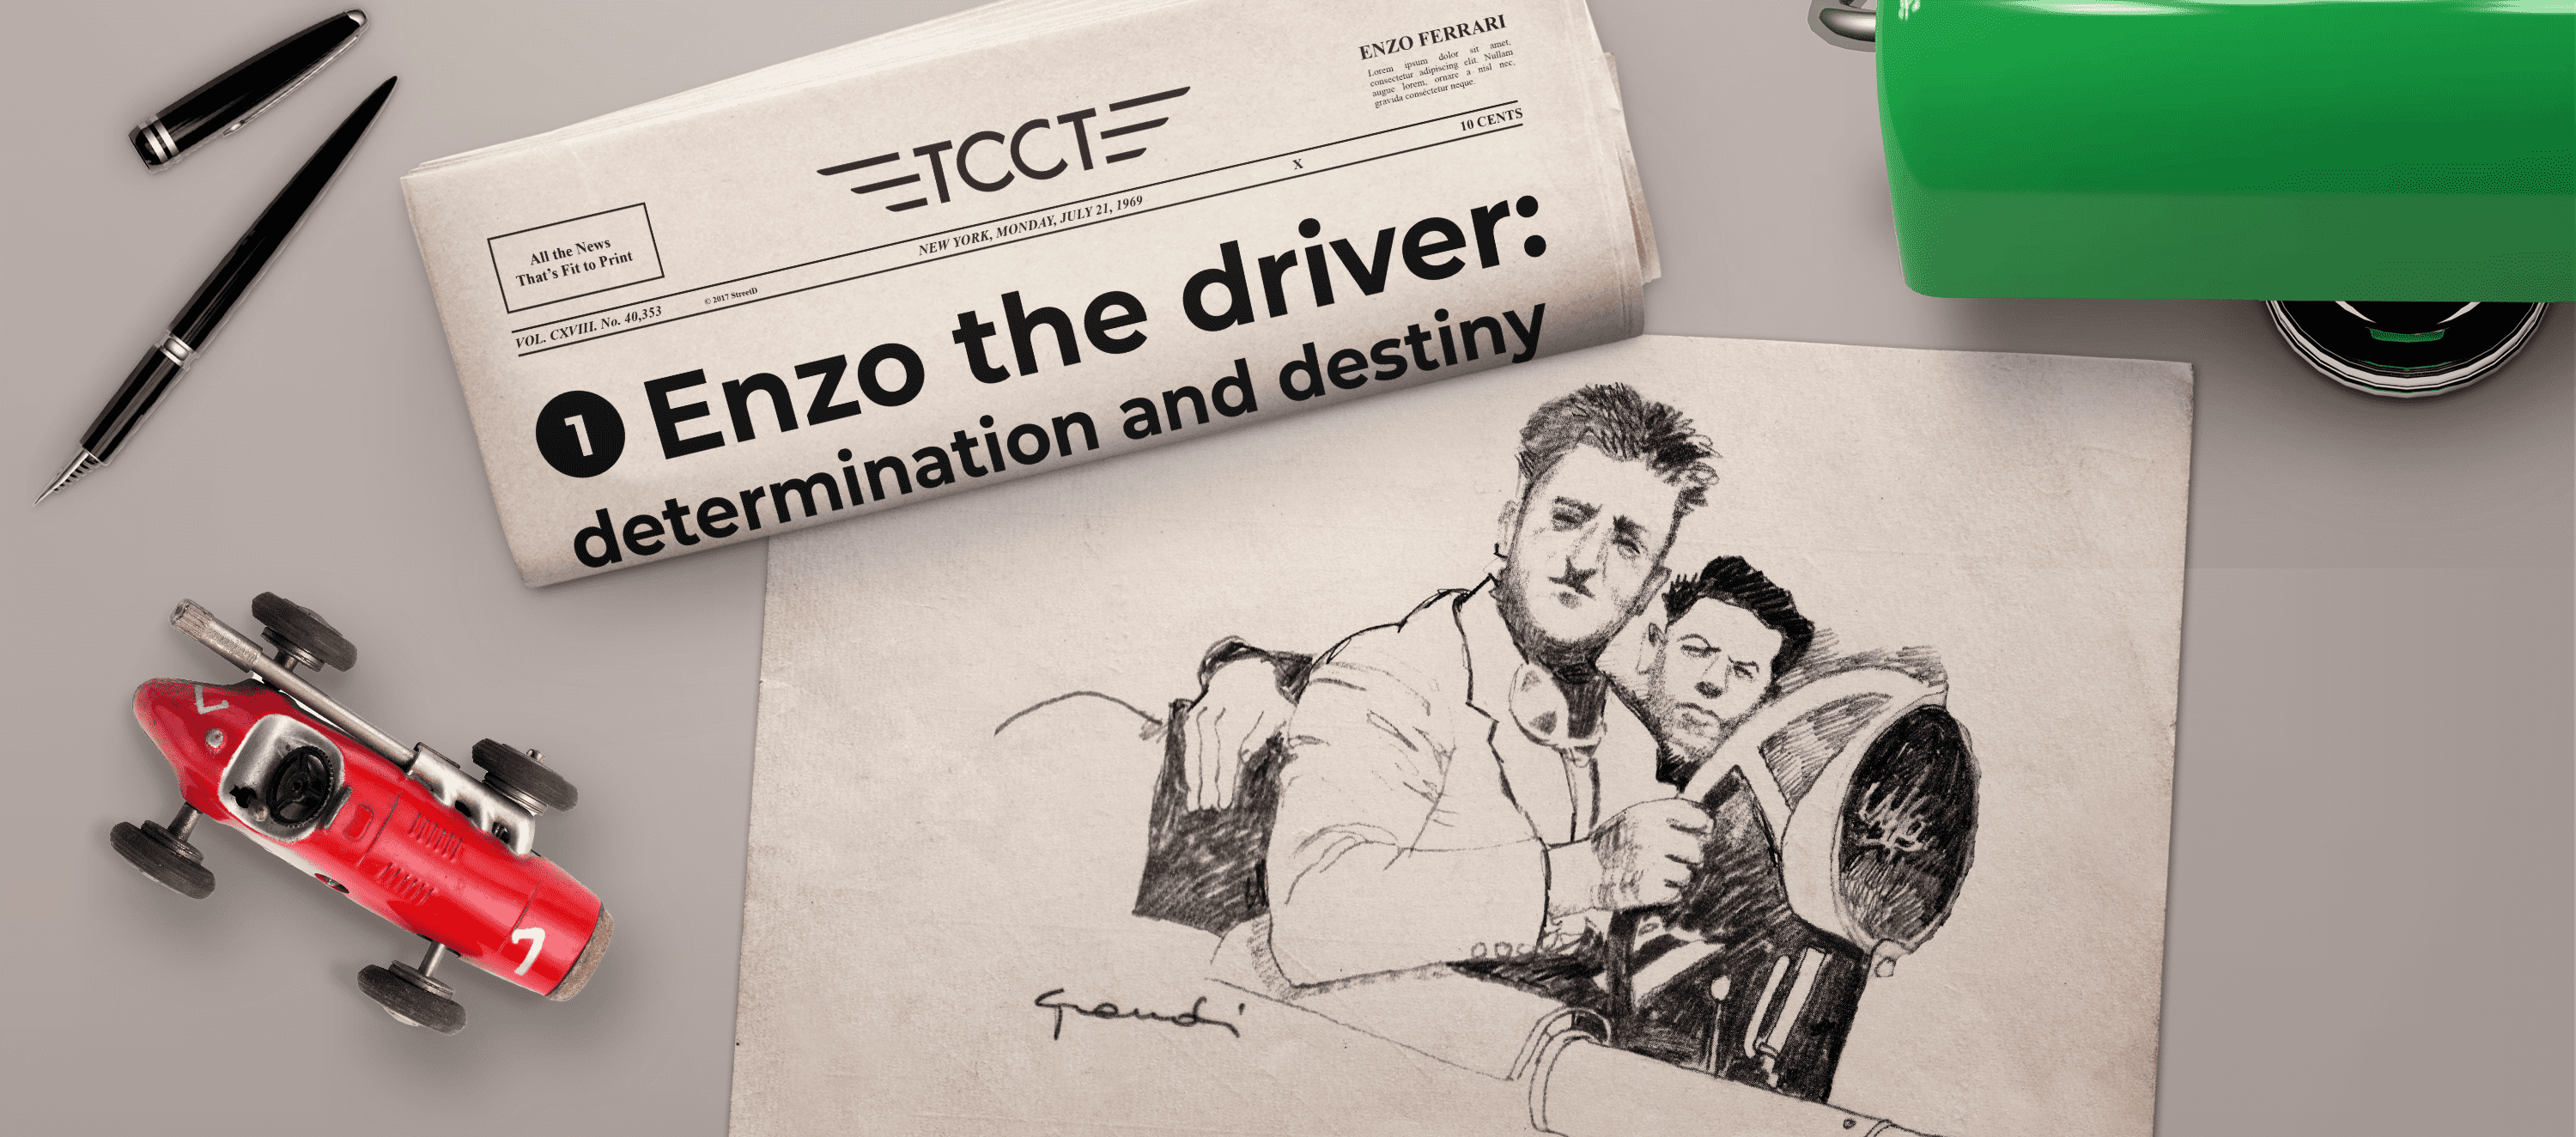 Enzo the driver: determination and destiny